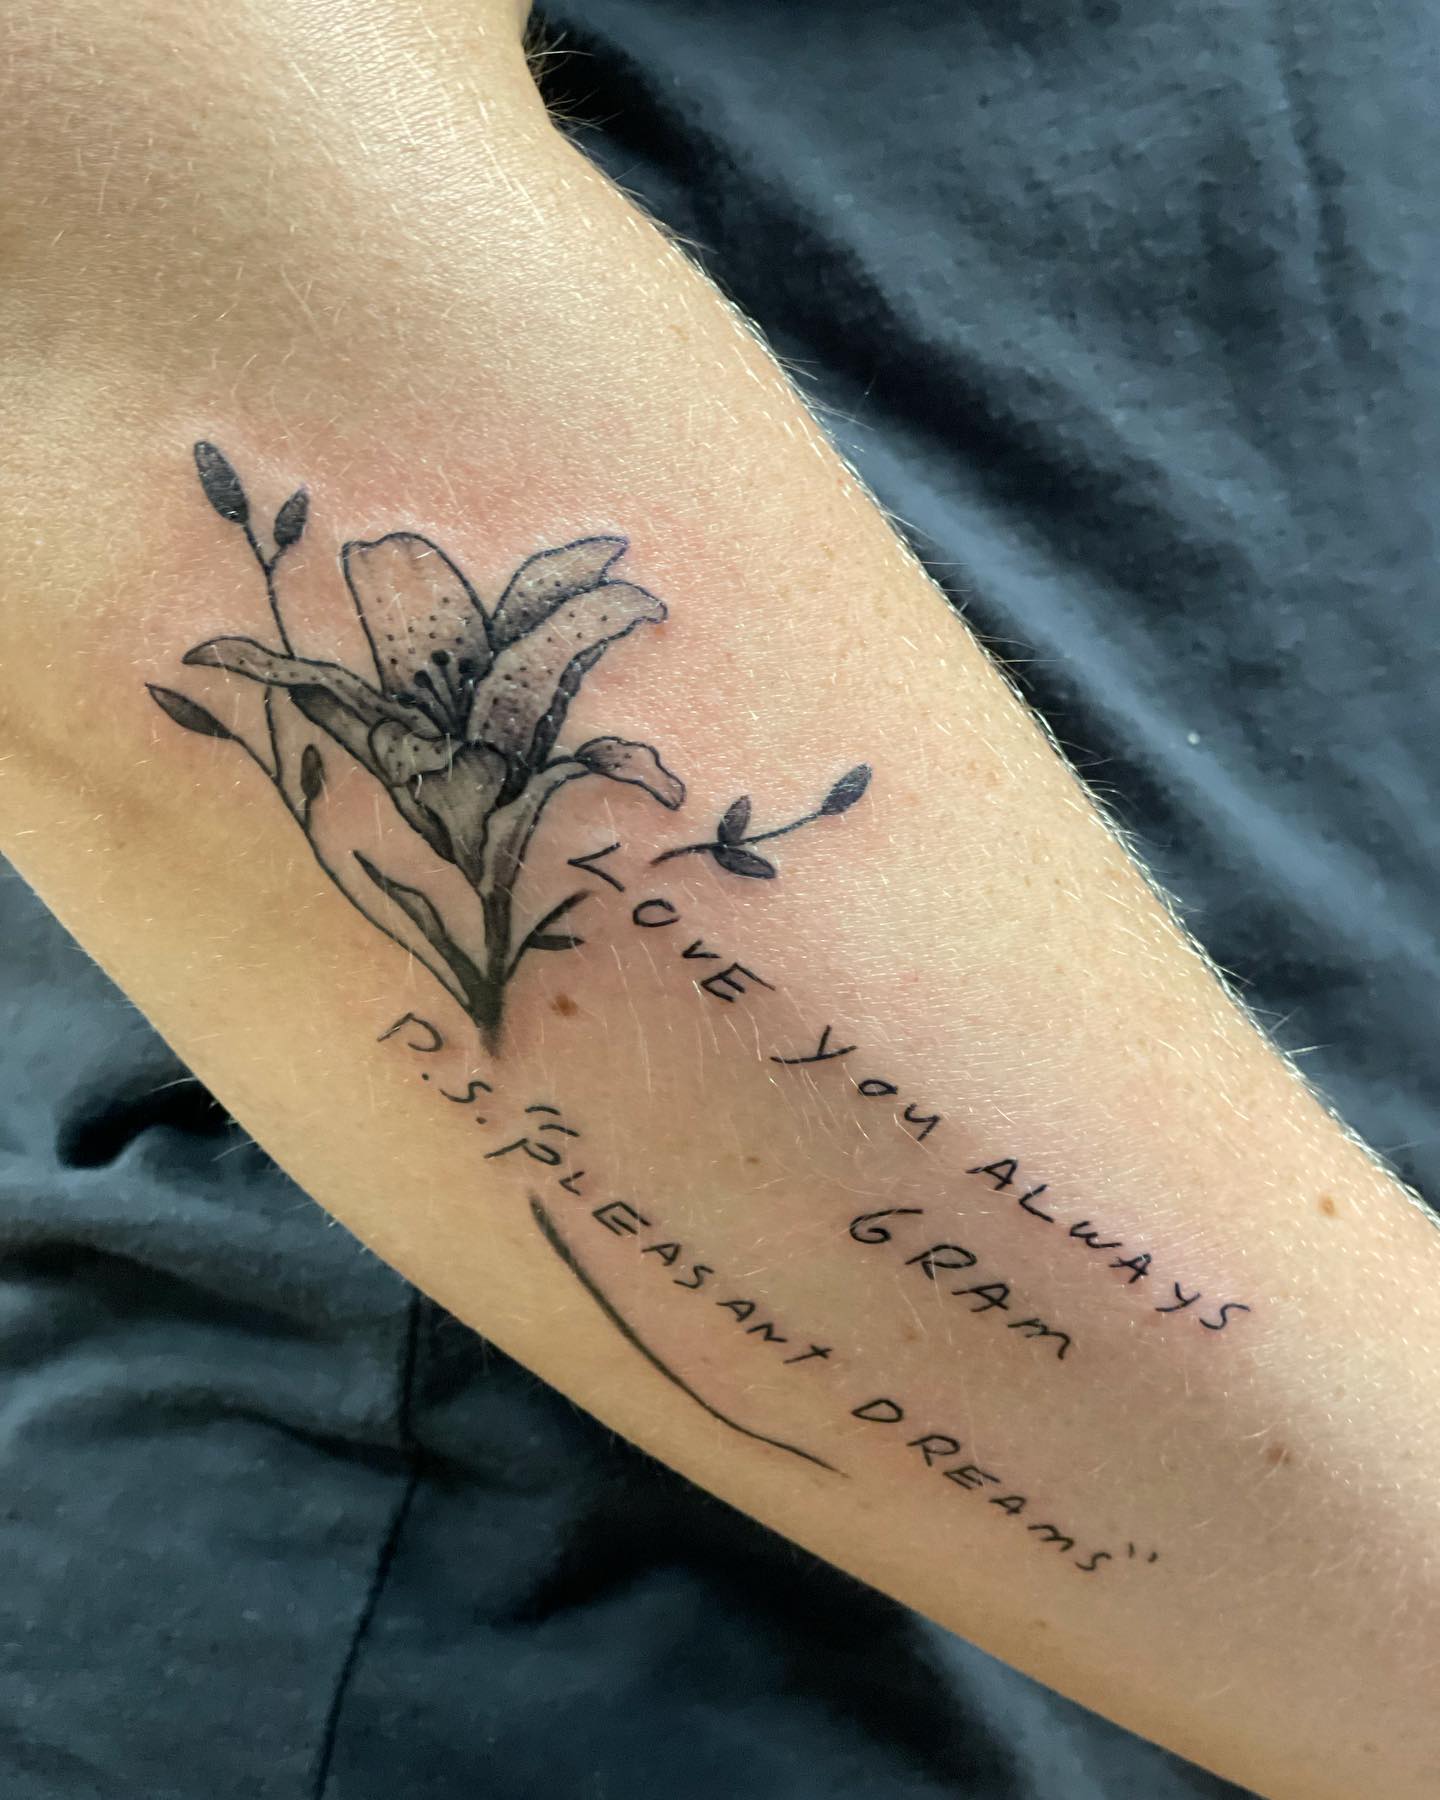 Lily tattoo with a love quote is very beautiful. The best part of it is that it shows the love between two people. Lily tattoo with a love quote shows how much couples care for each other and how much they want to be together forever.